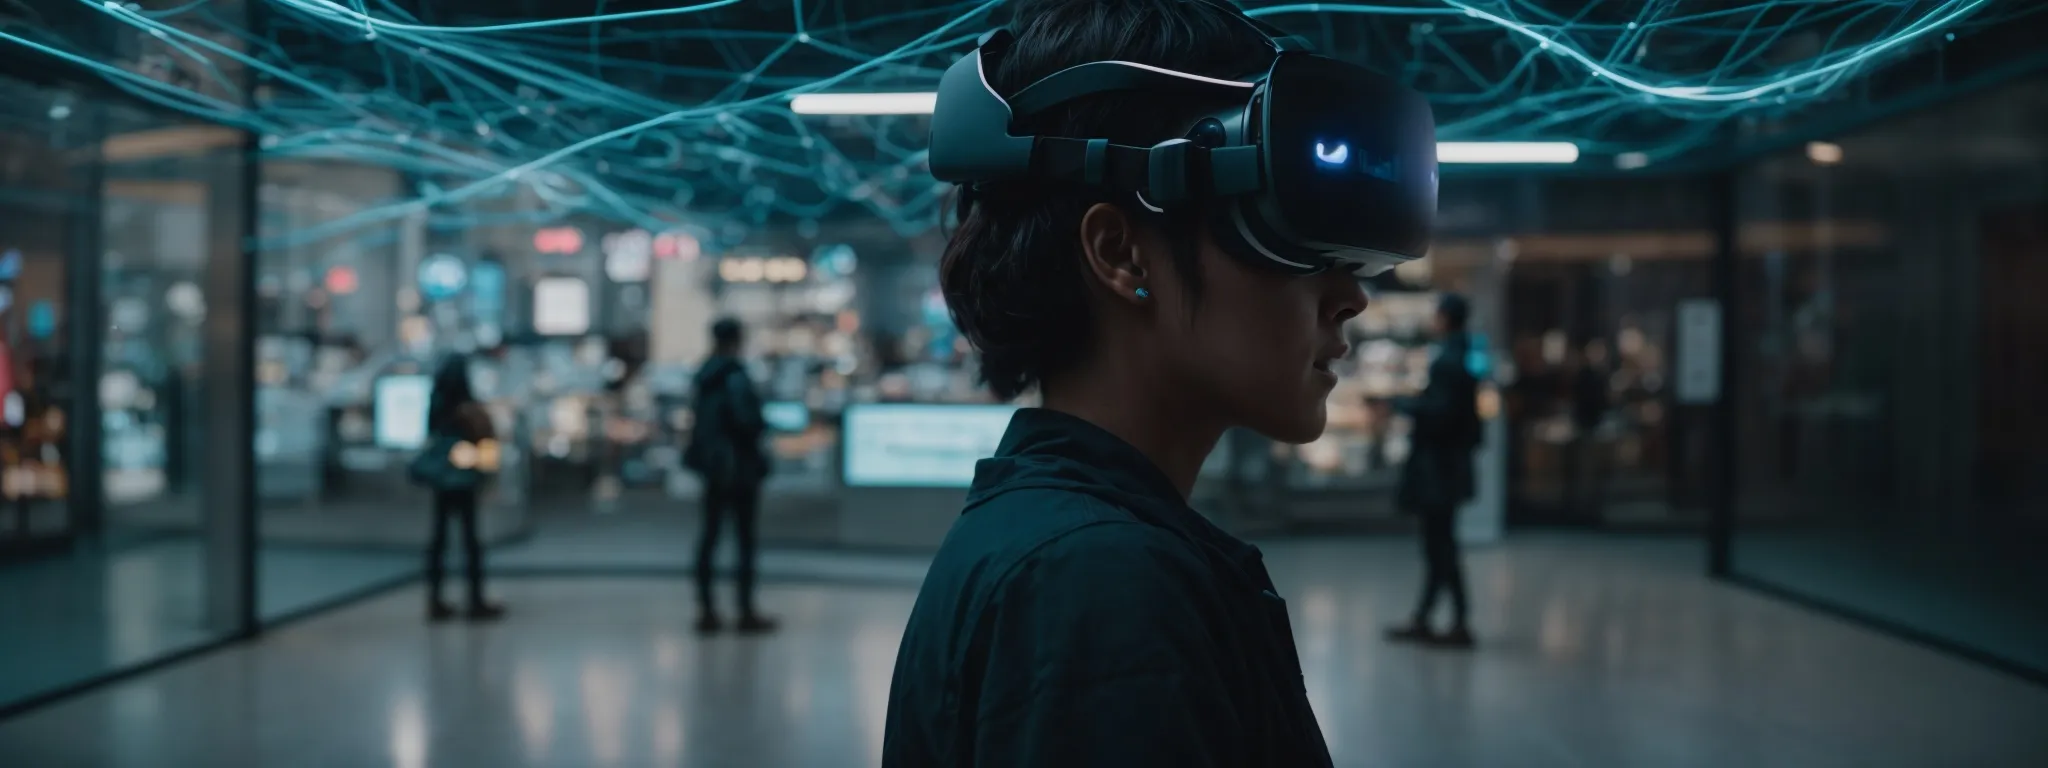 a person experiencing a virtual reality storefront with futuristic digital interfaces around them.